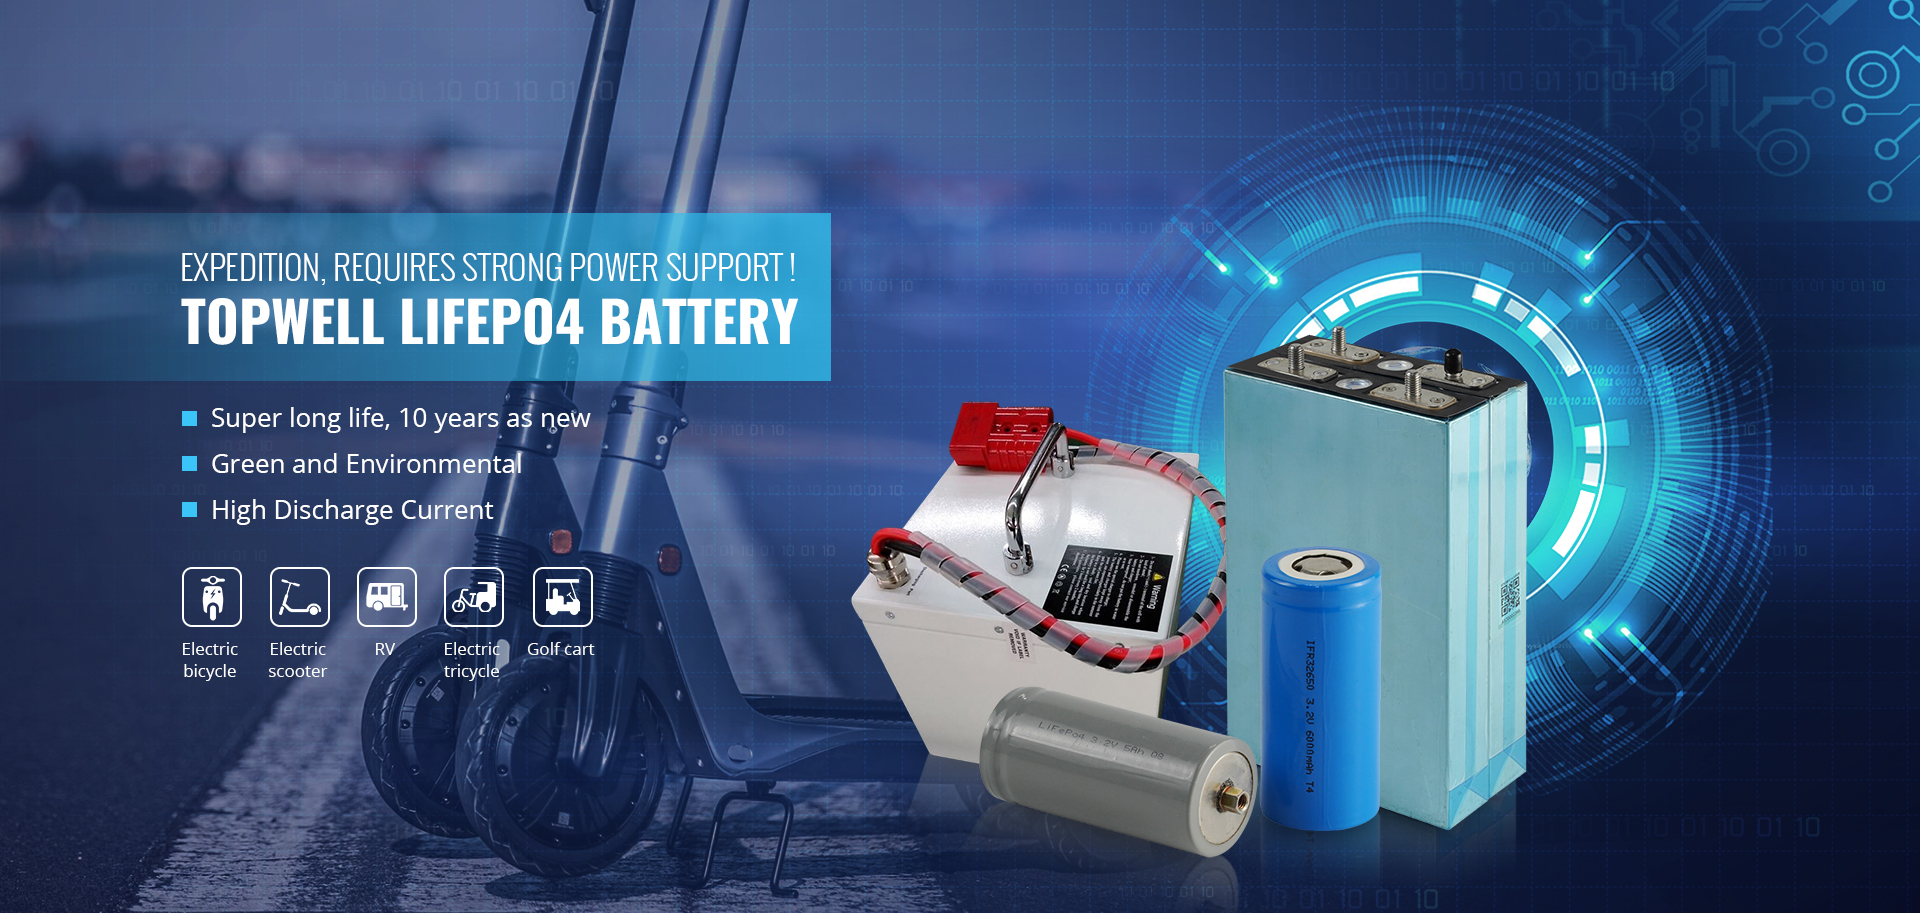 lifepo4 battery for electric scooter, lithium iron phosohate battery for electric vehicle